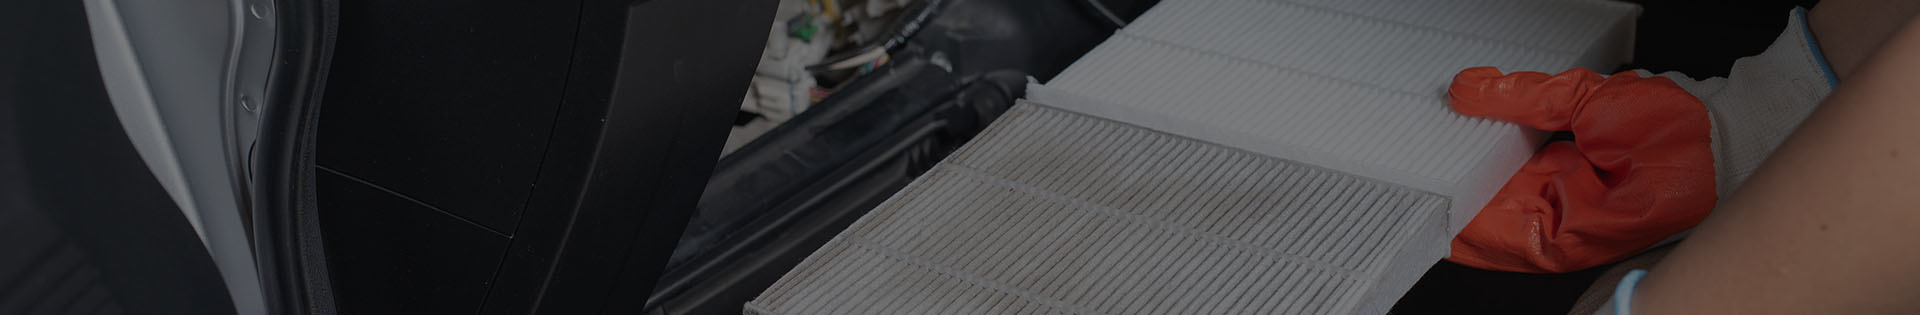 Air Filter Replacement in Albany, CA - Adams Autoworx Albany